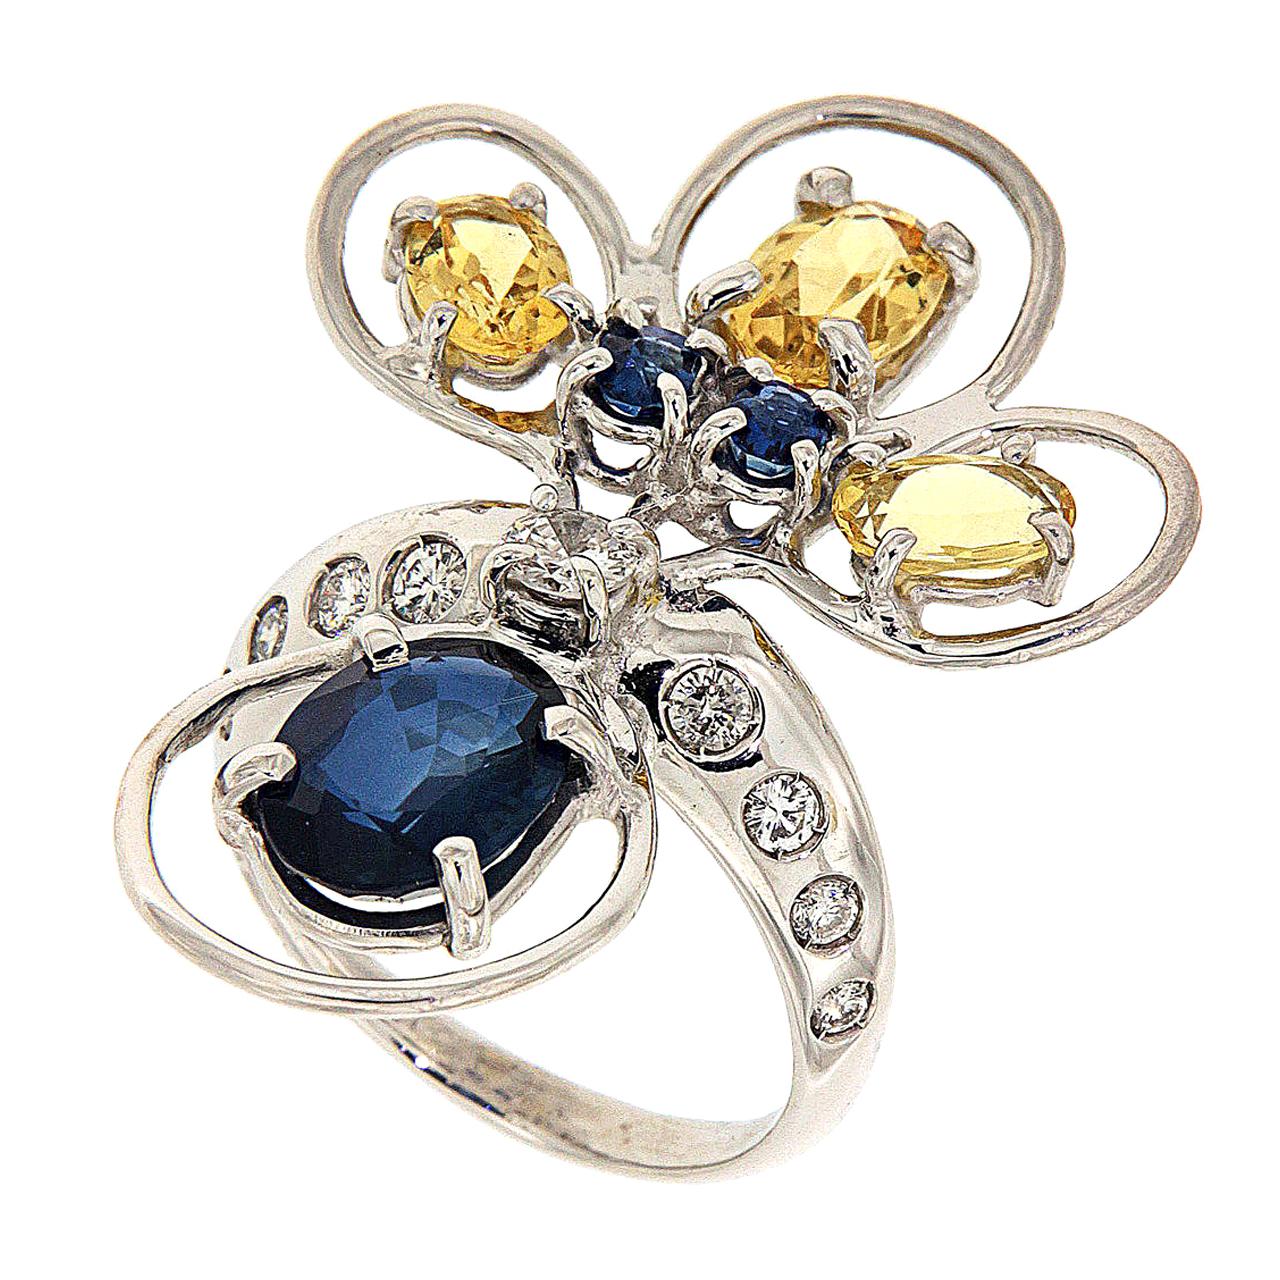 Sapphires Beryls Diamonds Gold Ring Handcrafted In Italy By Botta Gioielli